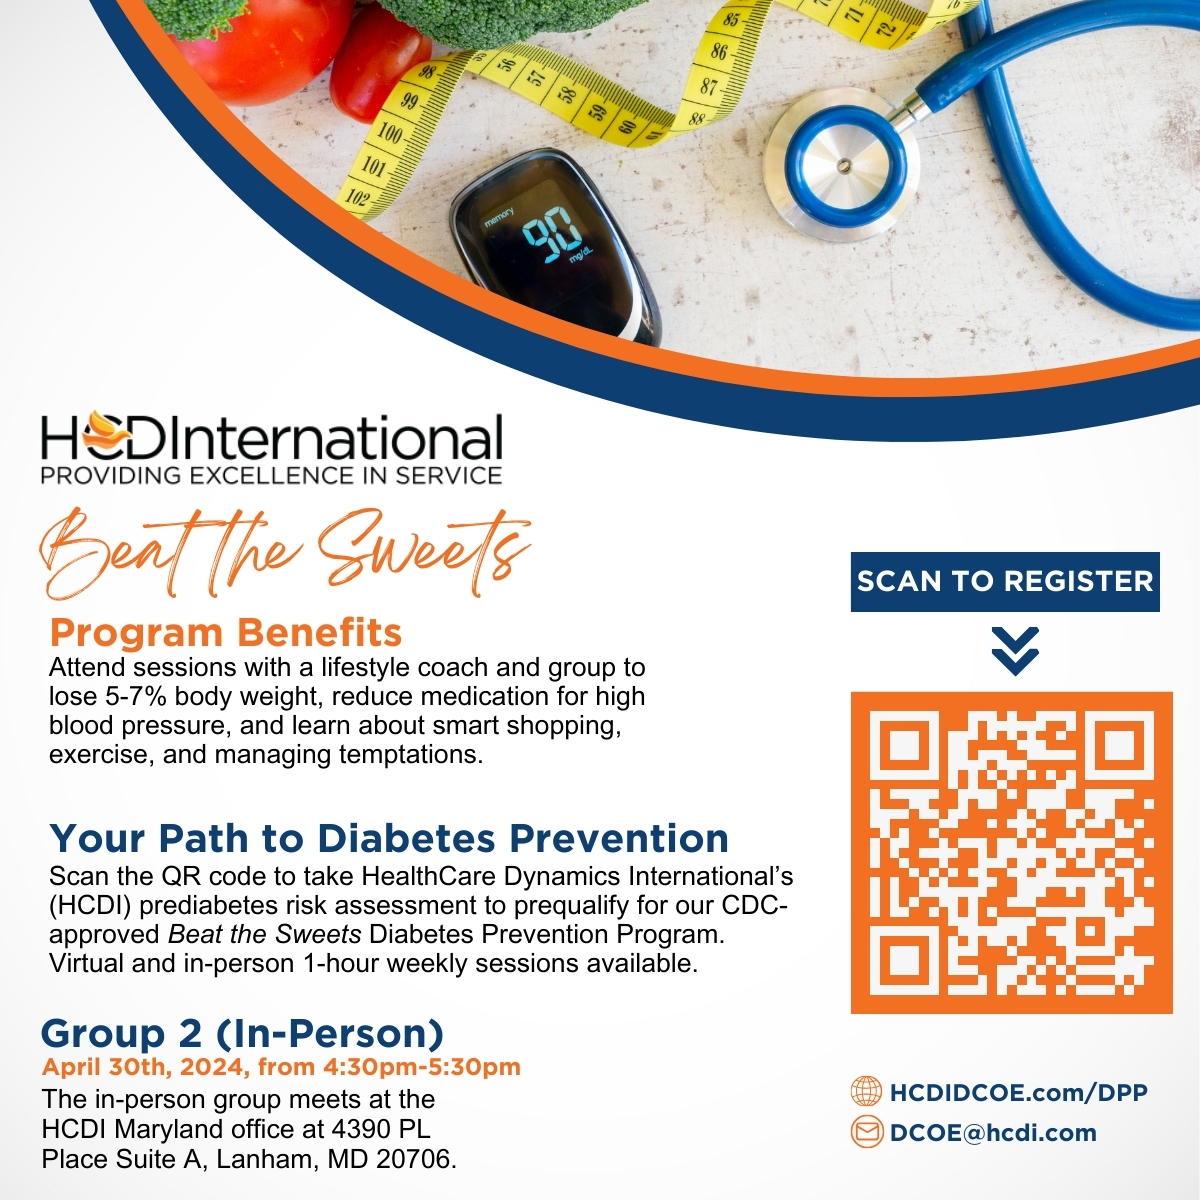 Group 2 meeting on April 30th, 4:30-5:30 pm, at HCDI office, 4390 Parliament Pl Ste A, Lanham, MD 20706. Register now at ow.ly/x4Qi50QW5zf. #Marylanders #nationalminorityhealthmonth #diabetic #Diabetes #communityhealth #wellnesswednesday